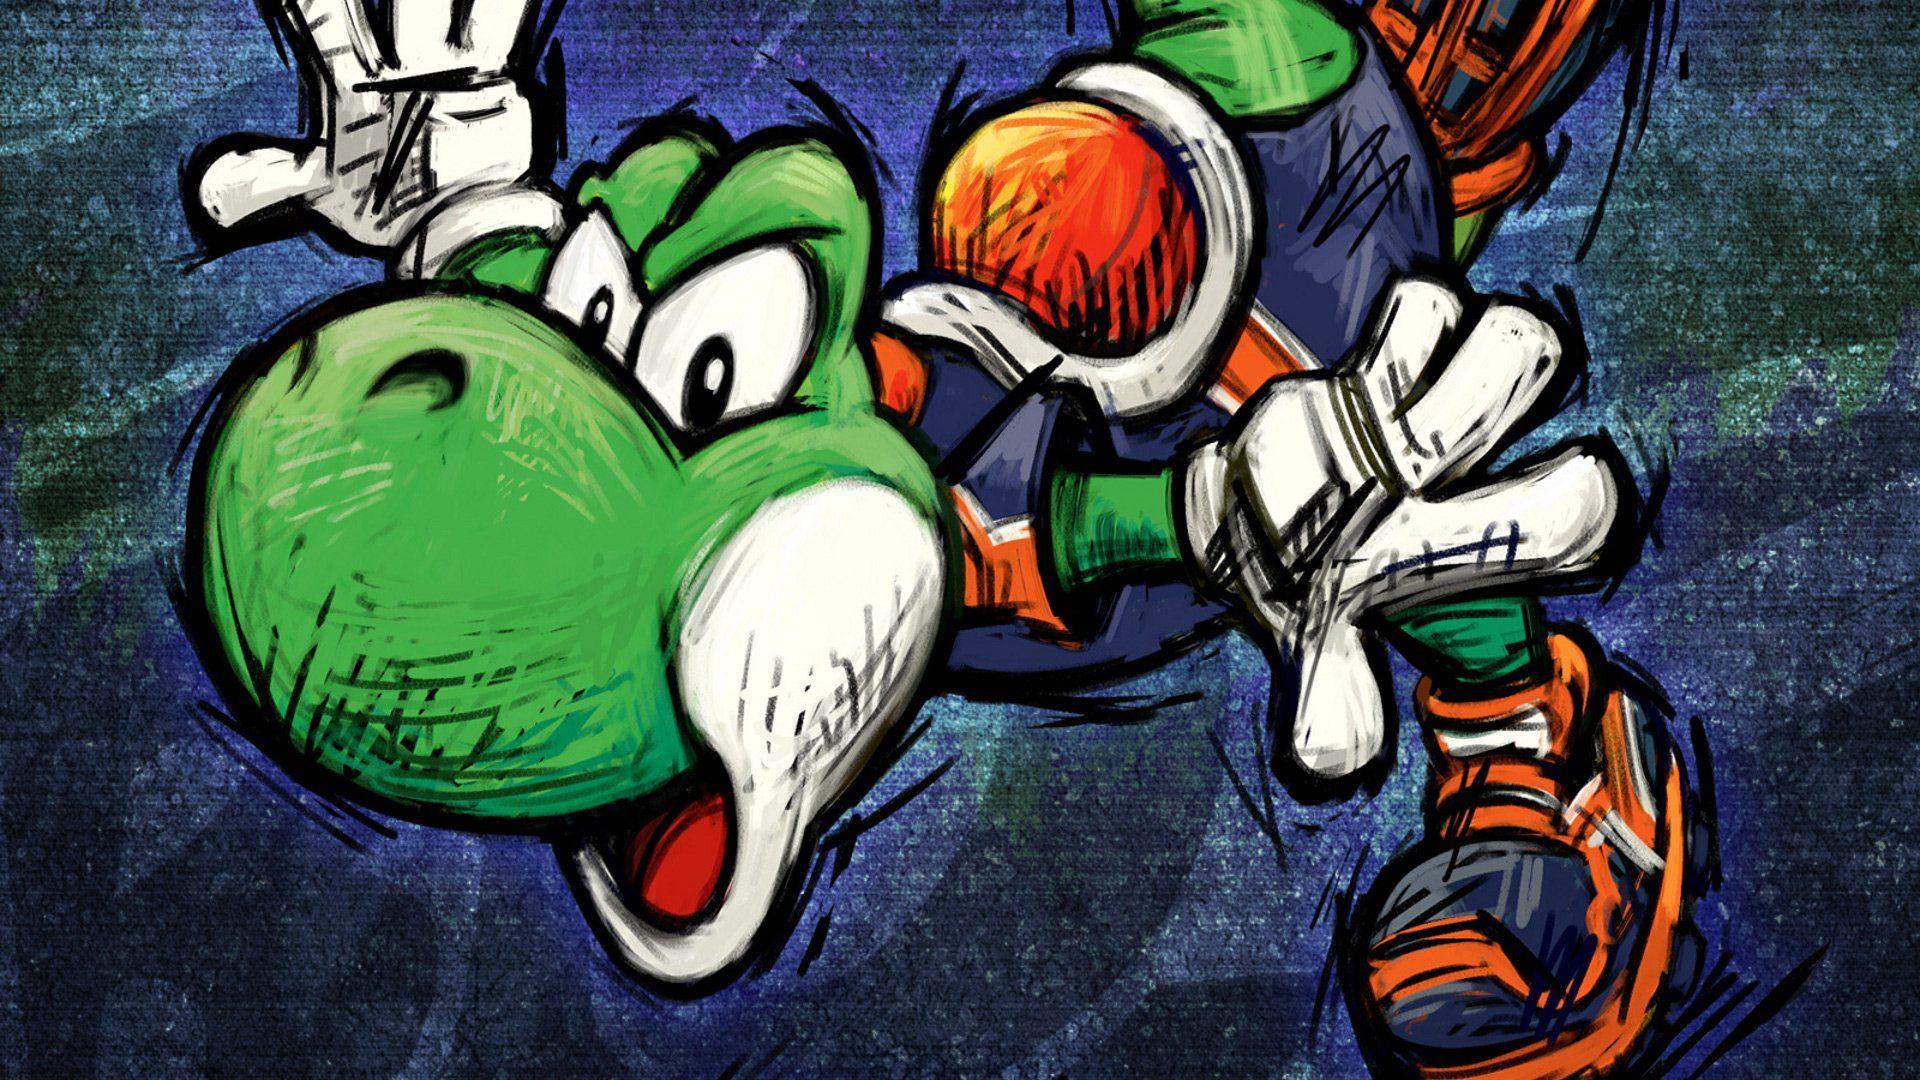 Super Mario Strikers HD Wallpaper and Background Image